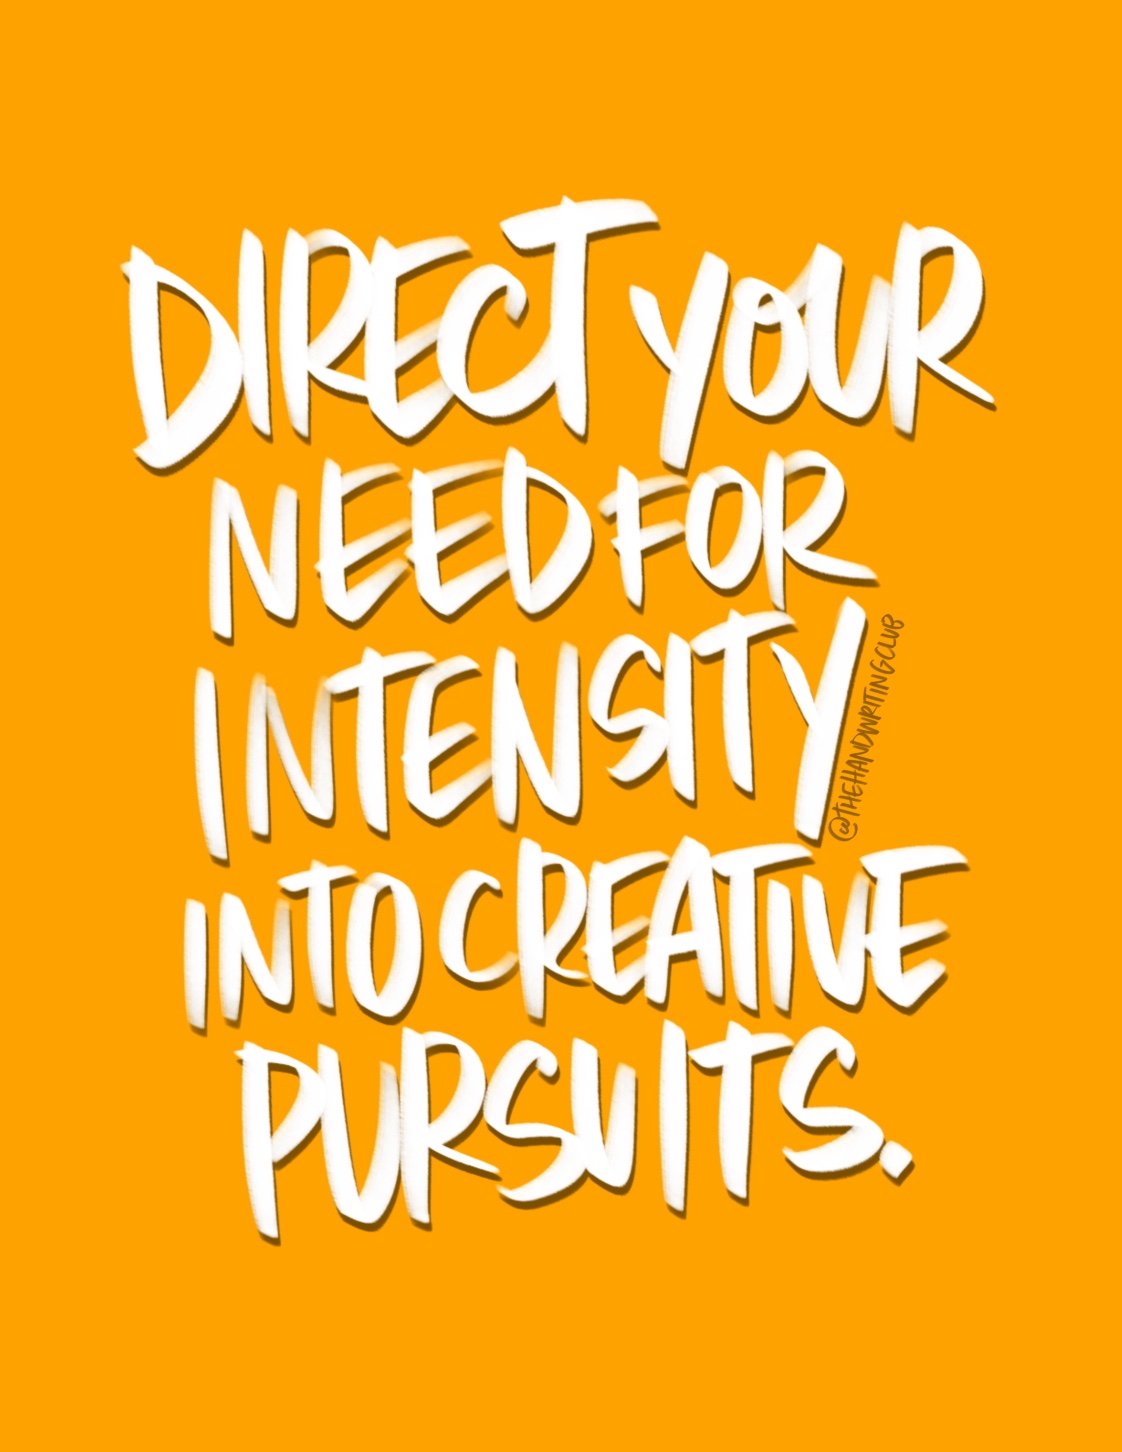 I love lists- Direct Your Need For Intensity- Tracy Benjamin